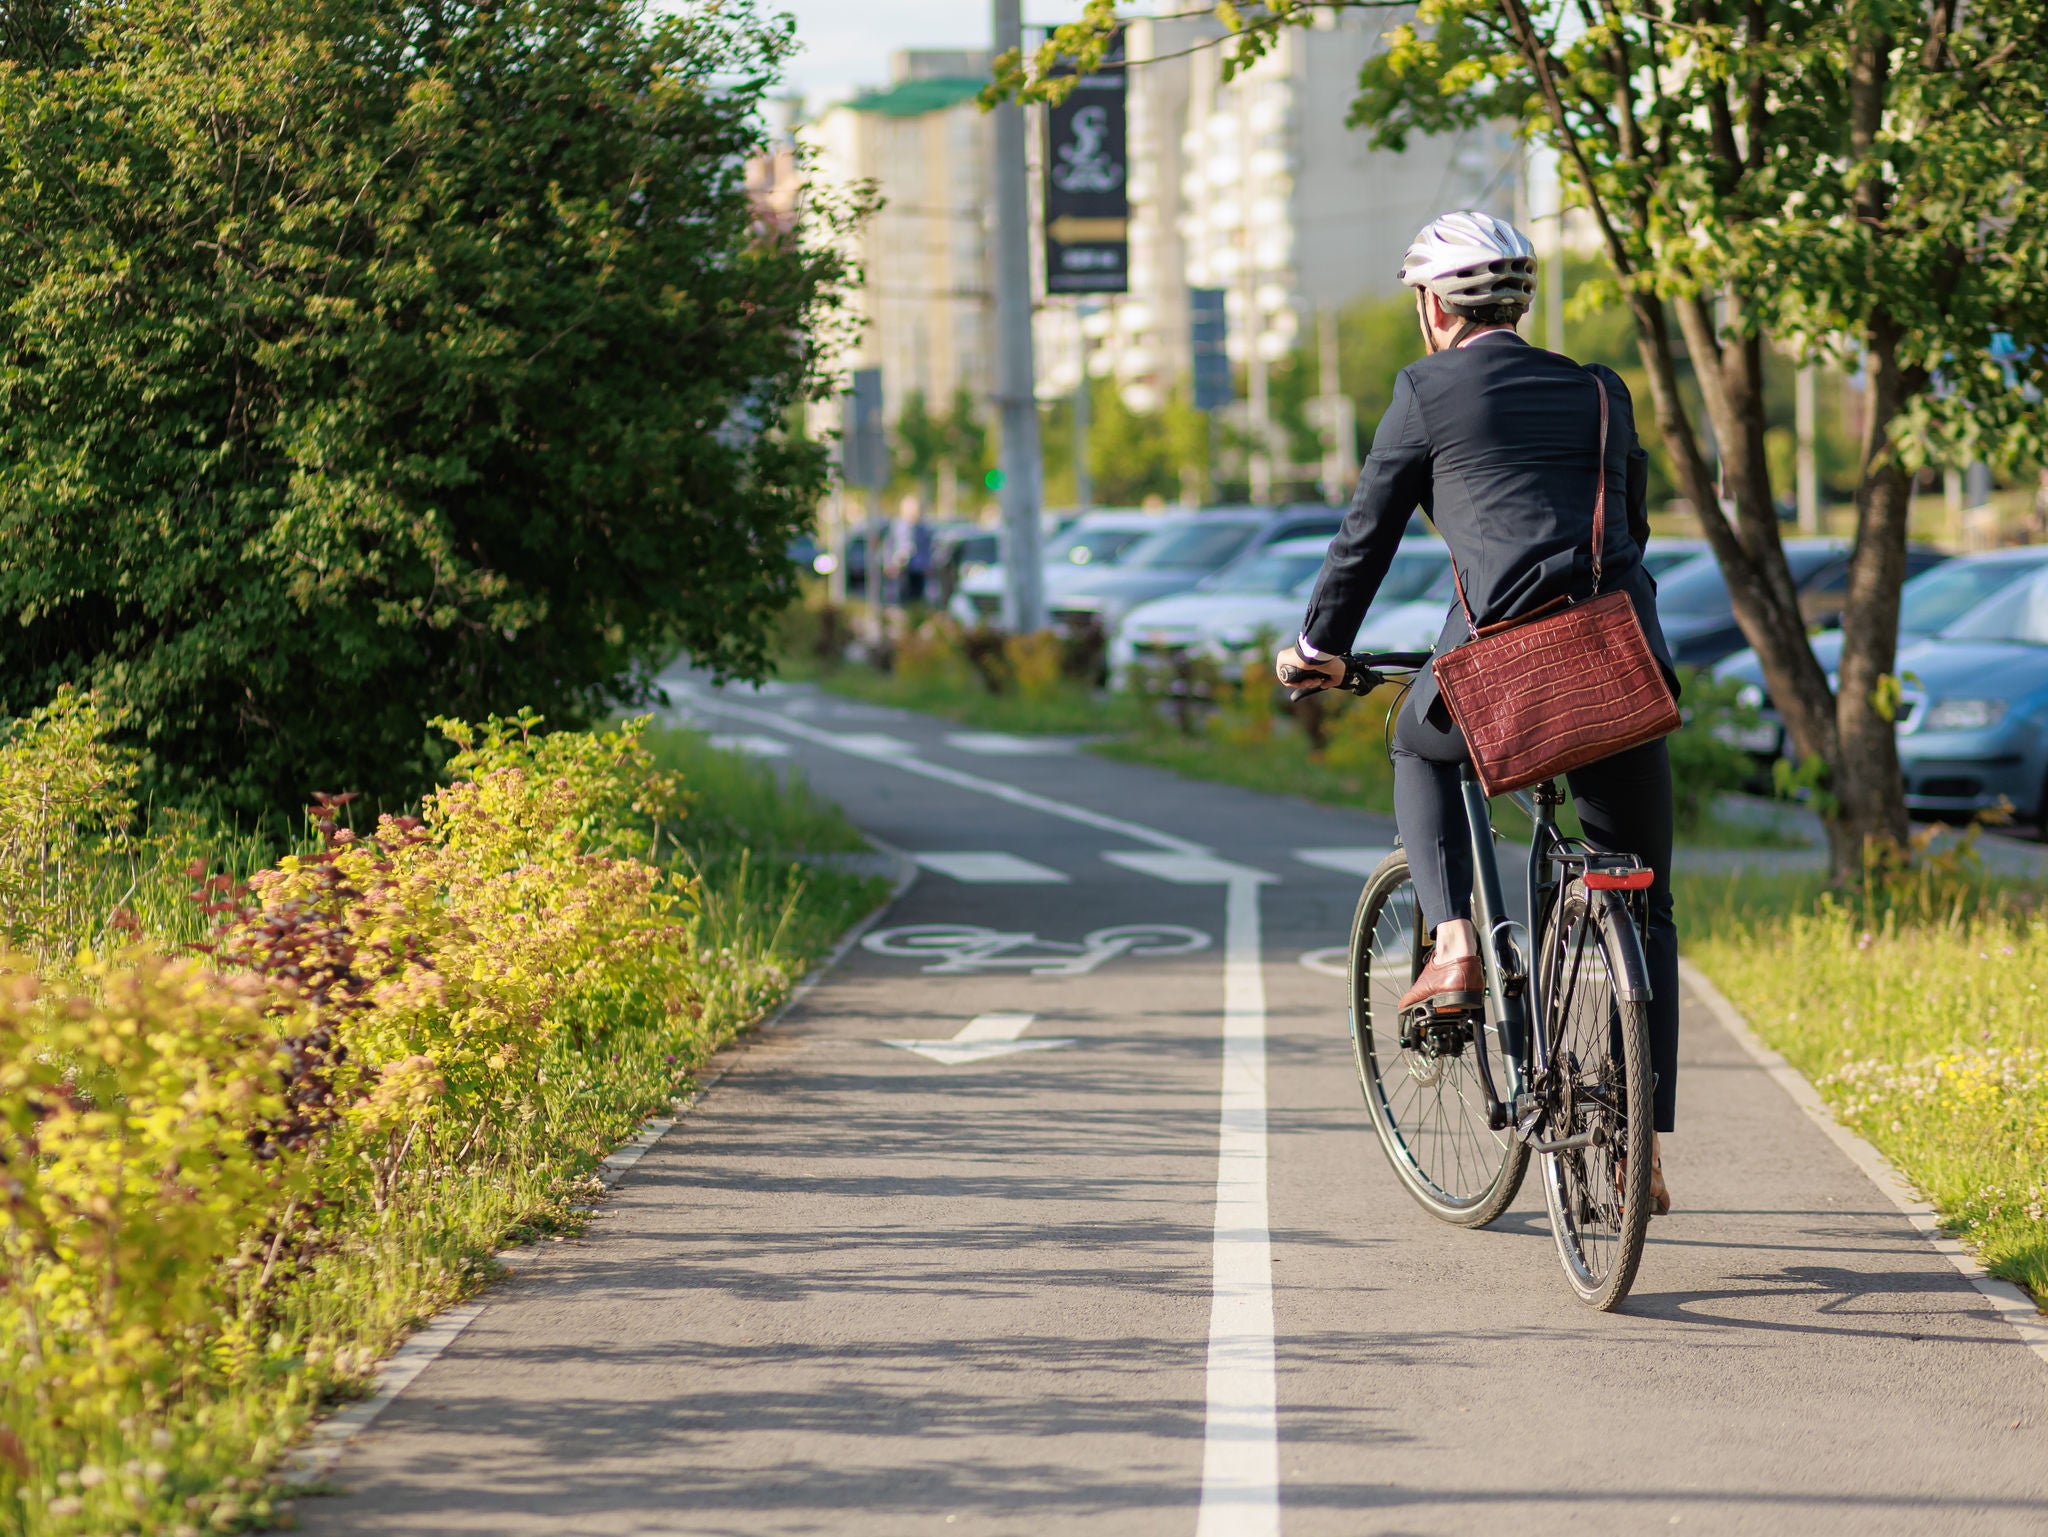 Stylish business man in helmet and suit cycling on bike path in sunny day. Back view of male employee with brown leather briefcase riding on bicycle in town. Concept of eco transport.